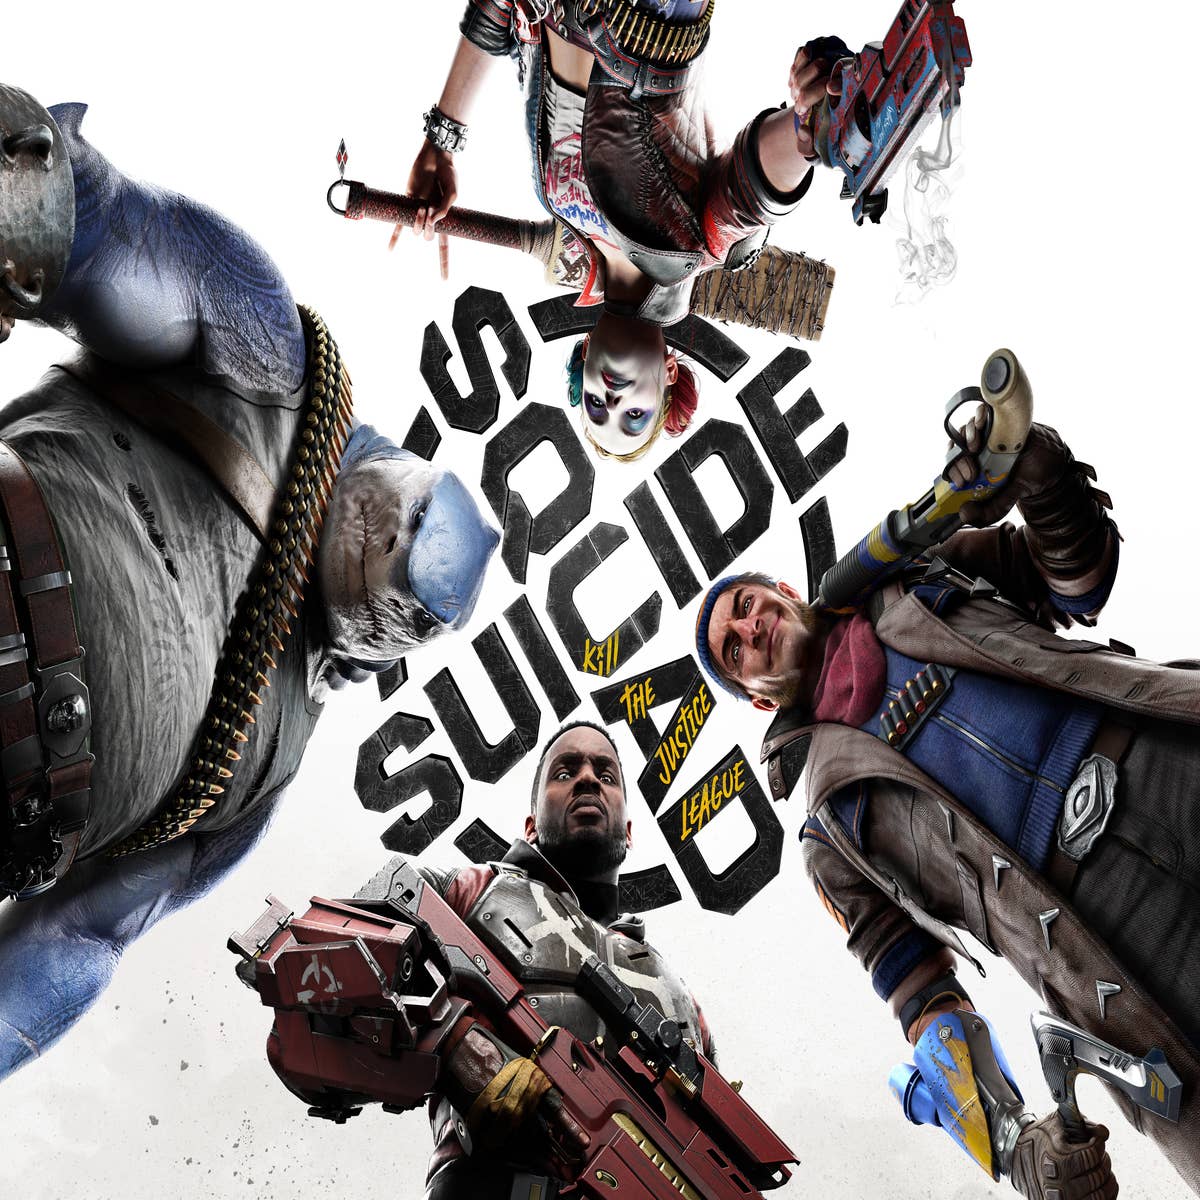 Suicide Squad Game & Gotham Knights Coming To PS5 - Report